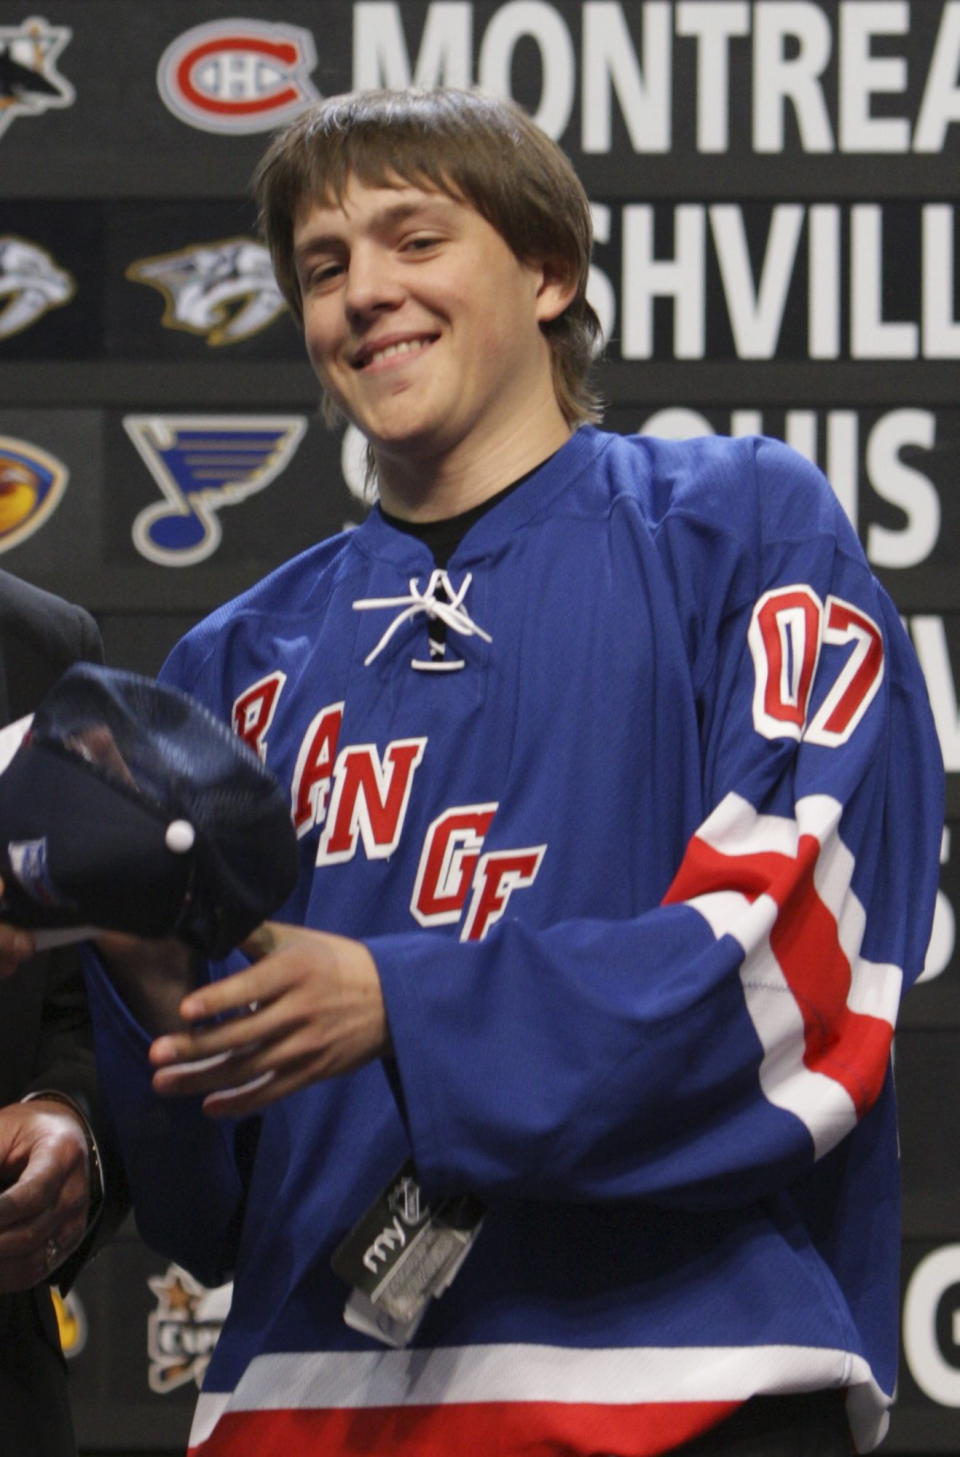 FILE - Alexei Cherepanov, of Russia, smiles after being selected by the New York Rangers during the first round of the NHL hockey draft on June 22, 2007, in Columbus, Ohio. Cherepanov died Oct. 13, 2007, during a game in Russia. He was 19. The horror that swept across the NFL when Buffalo BIlls defensive back Damar Hamlin collapsed and went into cardiac arrest during a game this week in Cincinnati was all too familiar to members of the hockey community. (AP Photo/Jay LaPrete, File)